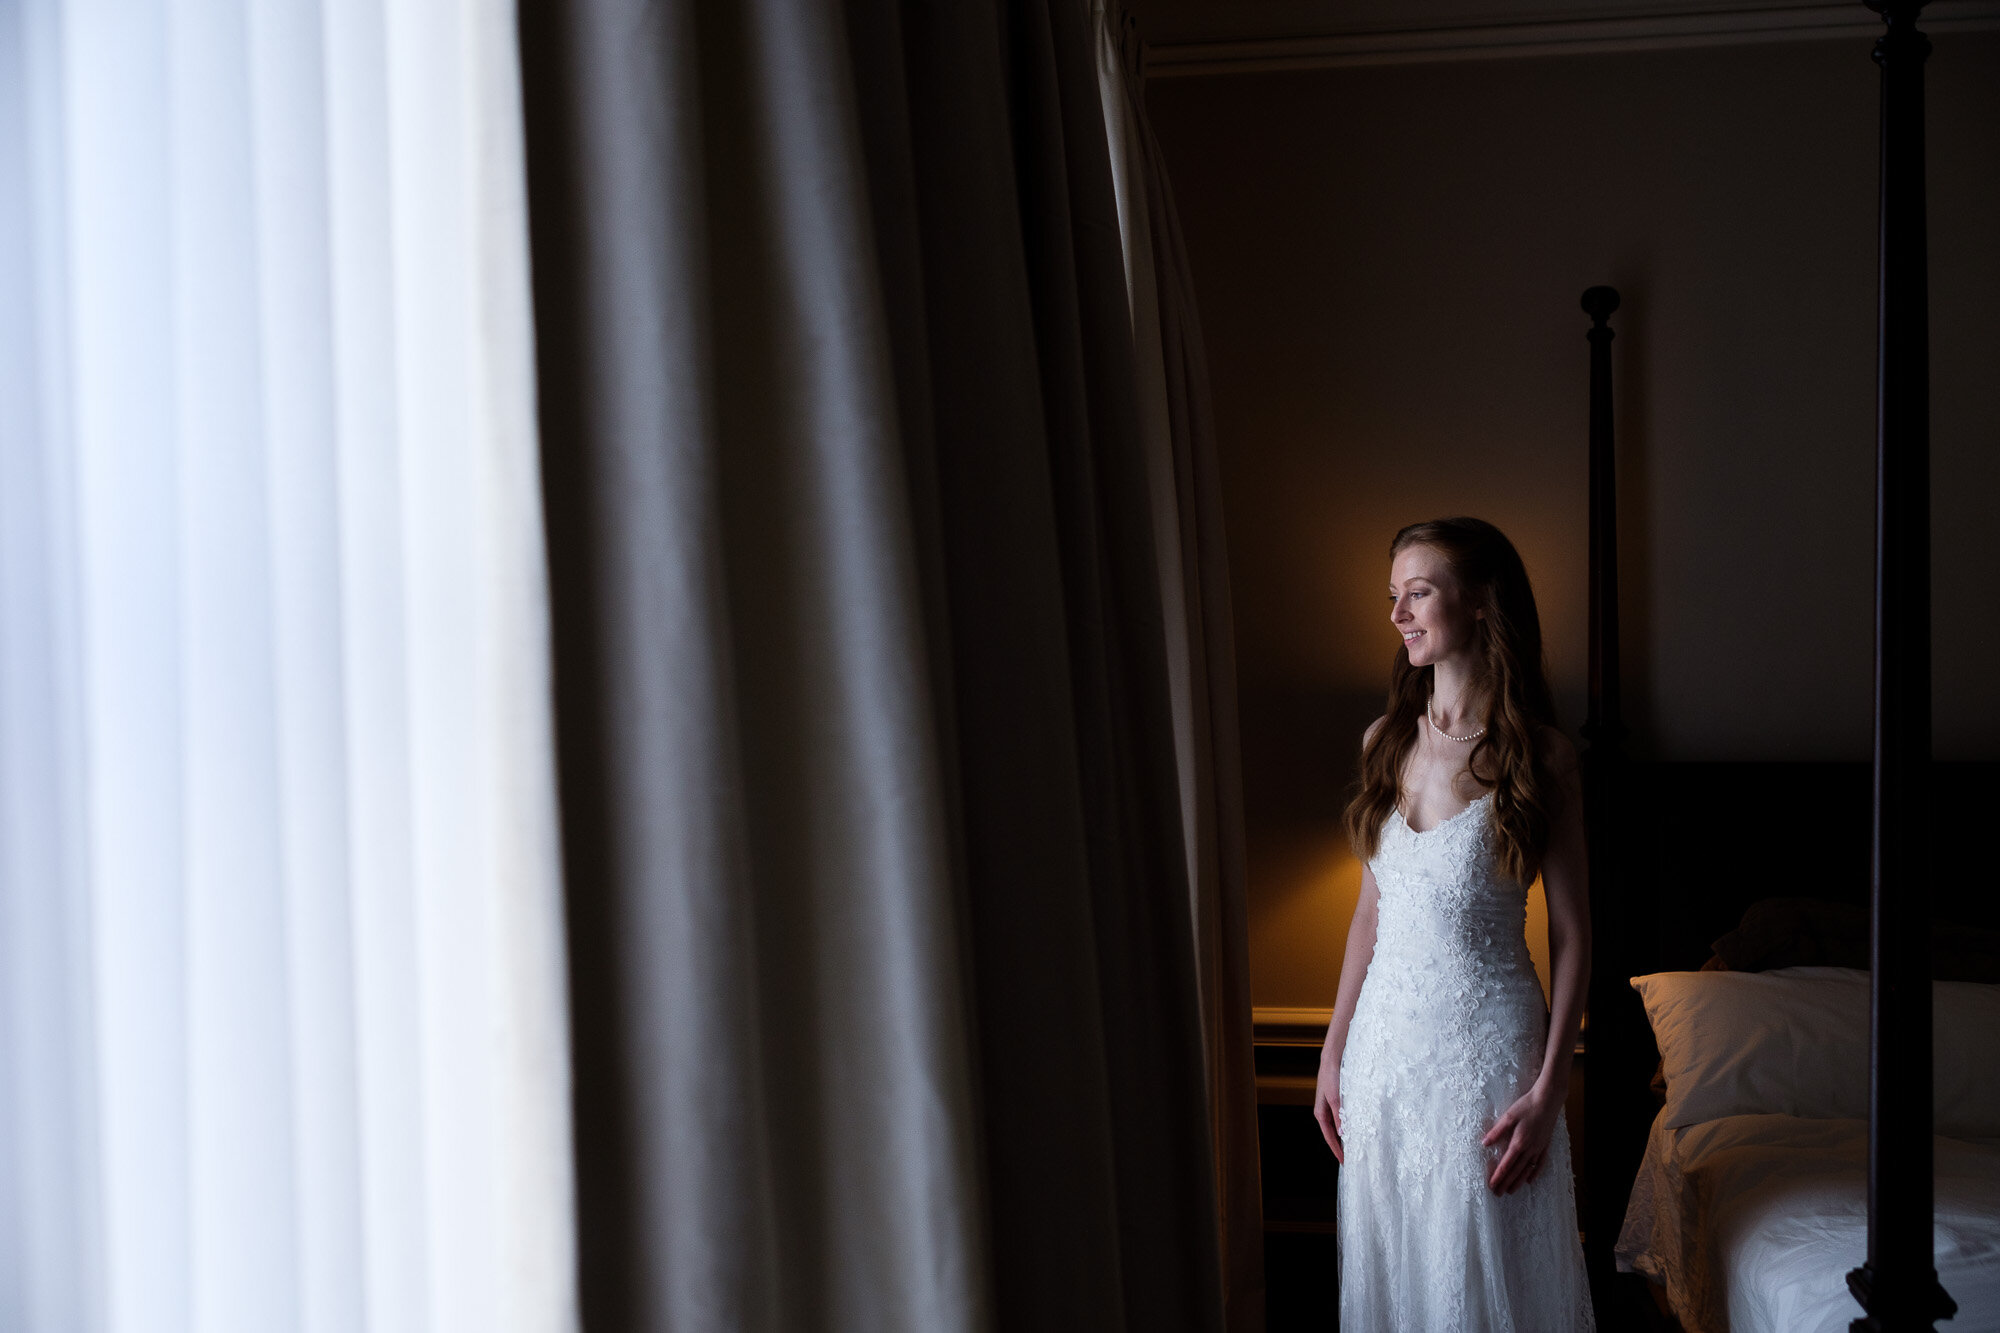  Laura poses for a wedding portrait in her room at Langdon Hall in Cambridge, Ontario during their small intimate winter wedding. Wedding photograph by Toronto wedding photographer Scott Williams. 